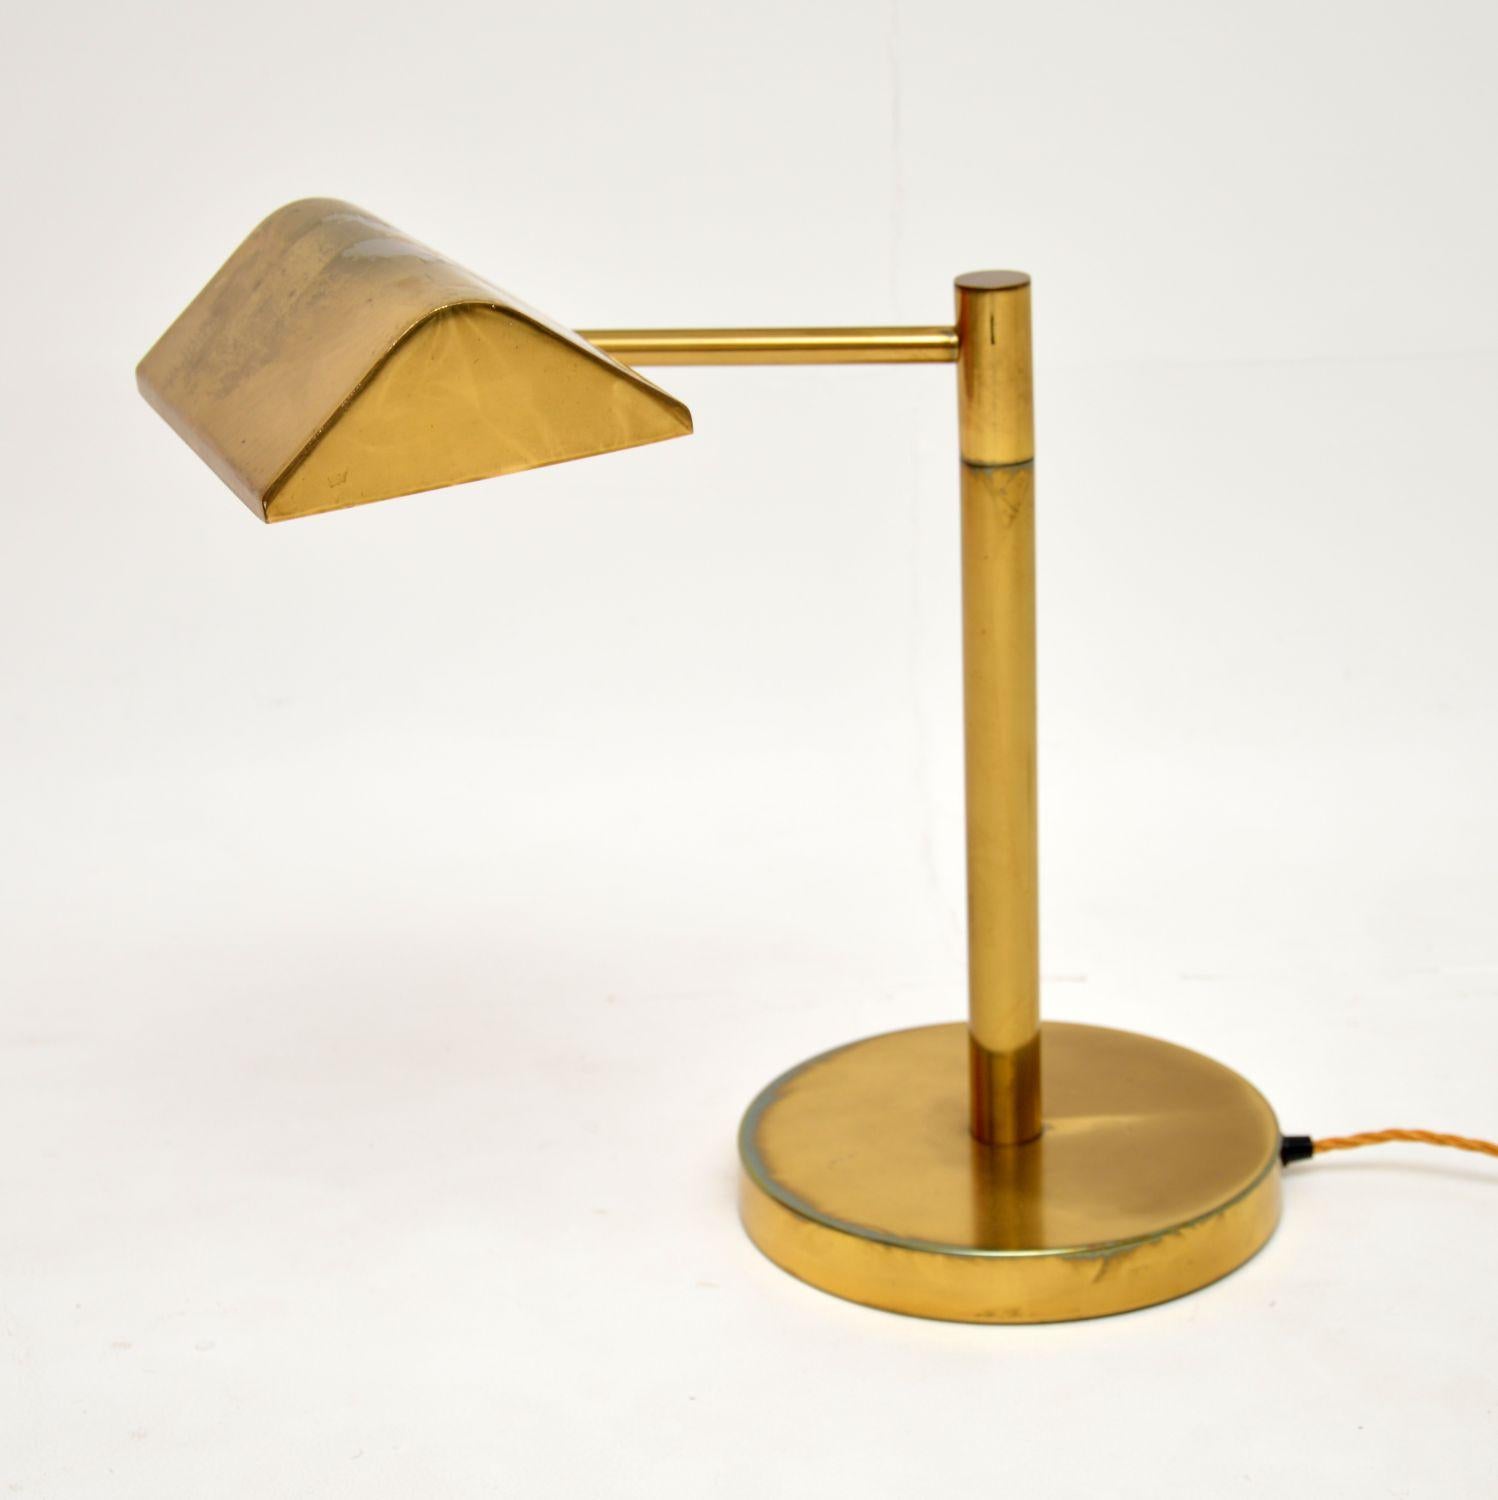 A very stylish and extremely well made vintage brass desk lamp. This was made in England, it dates from the 1960-70’s.

It is of amazing quality, it is very heavy for its size. The shade is mounted on an extending swivelling arm, so can be